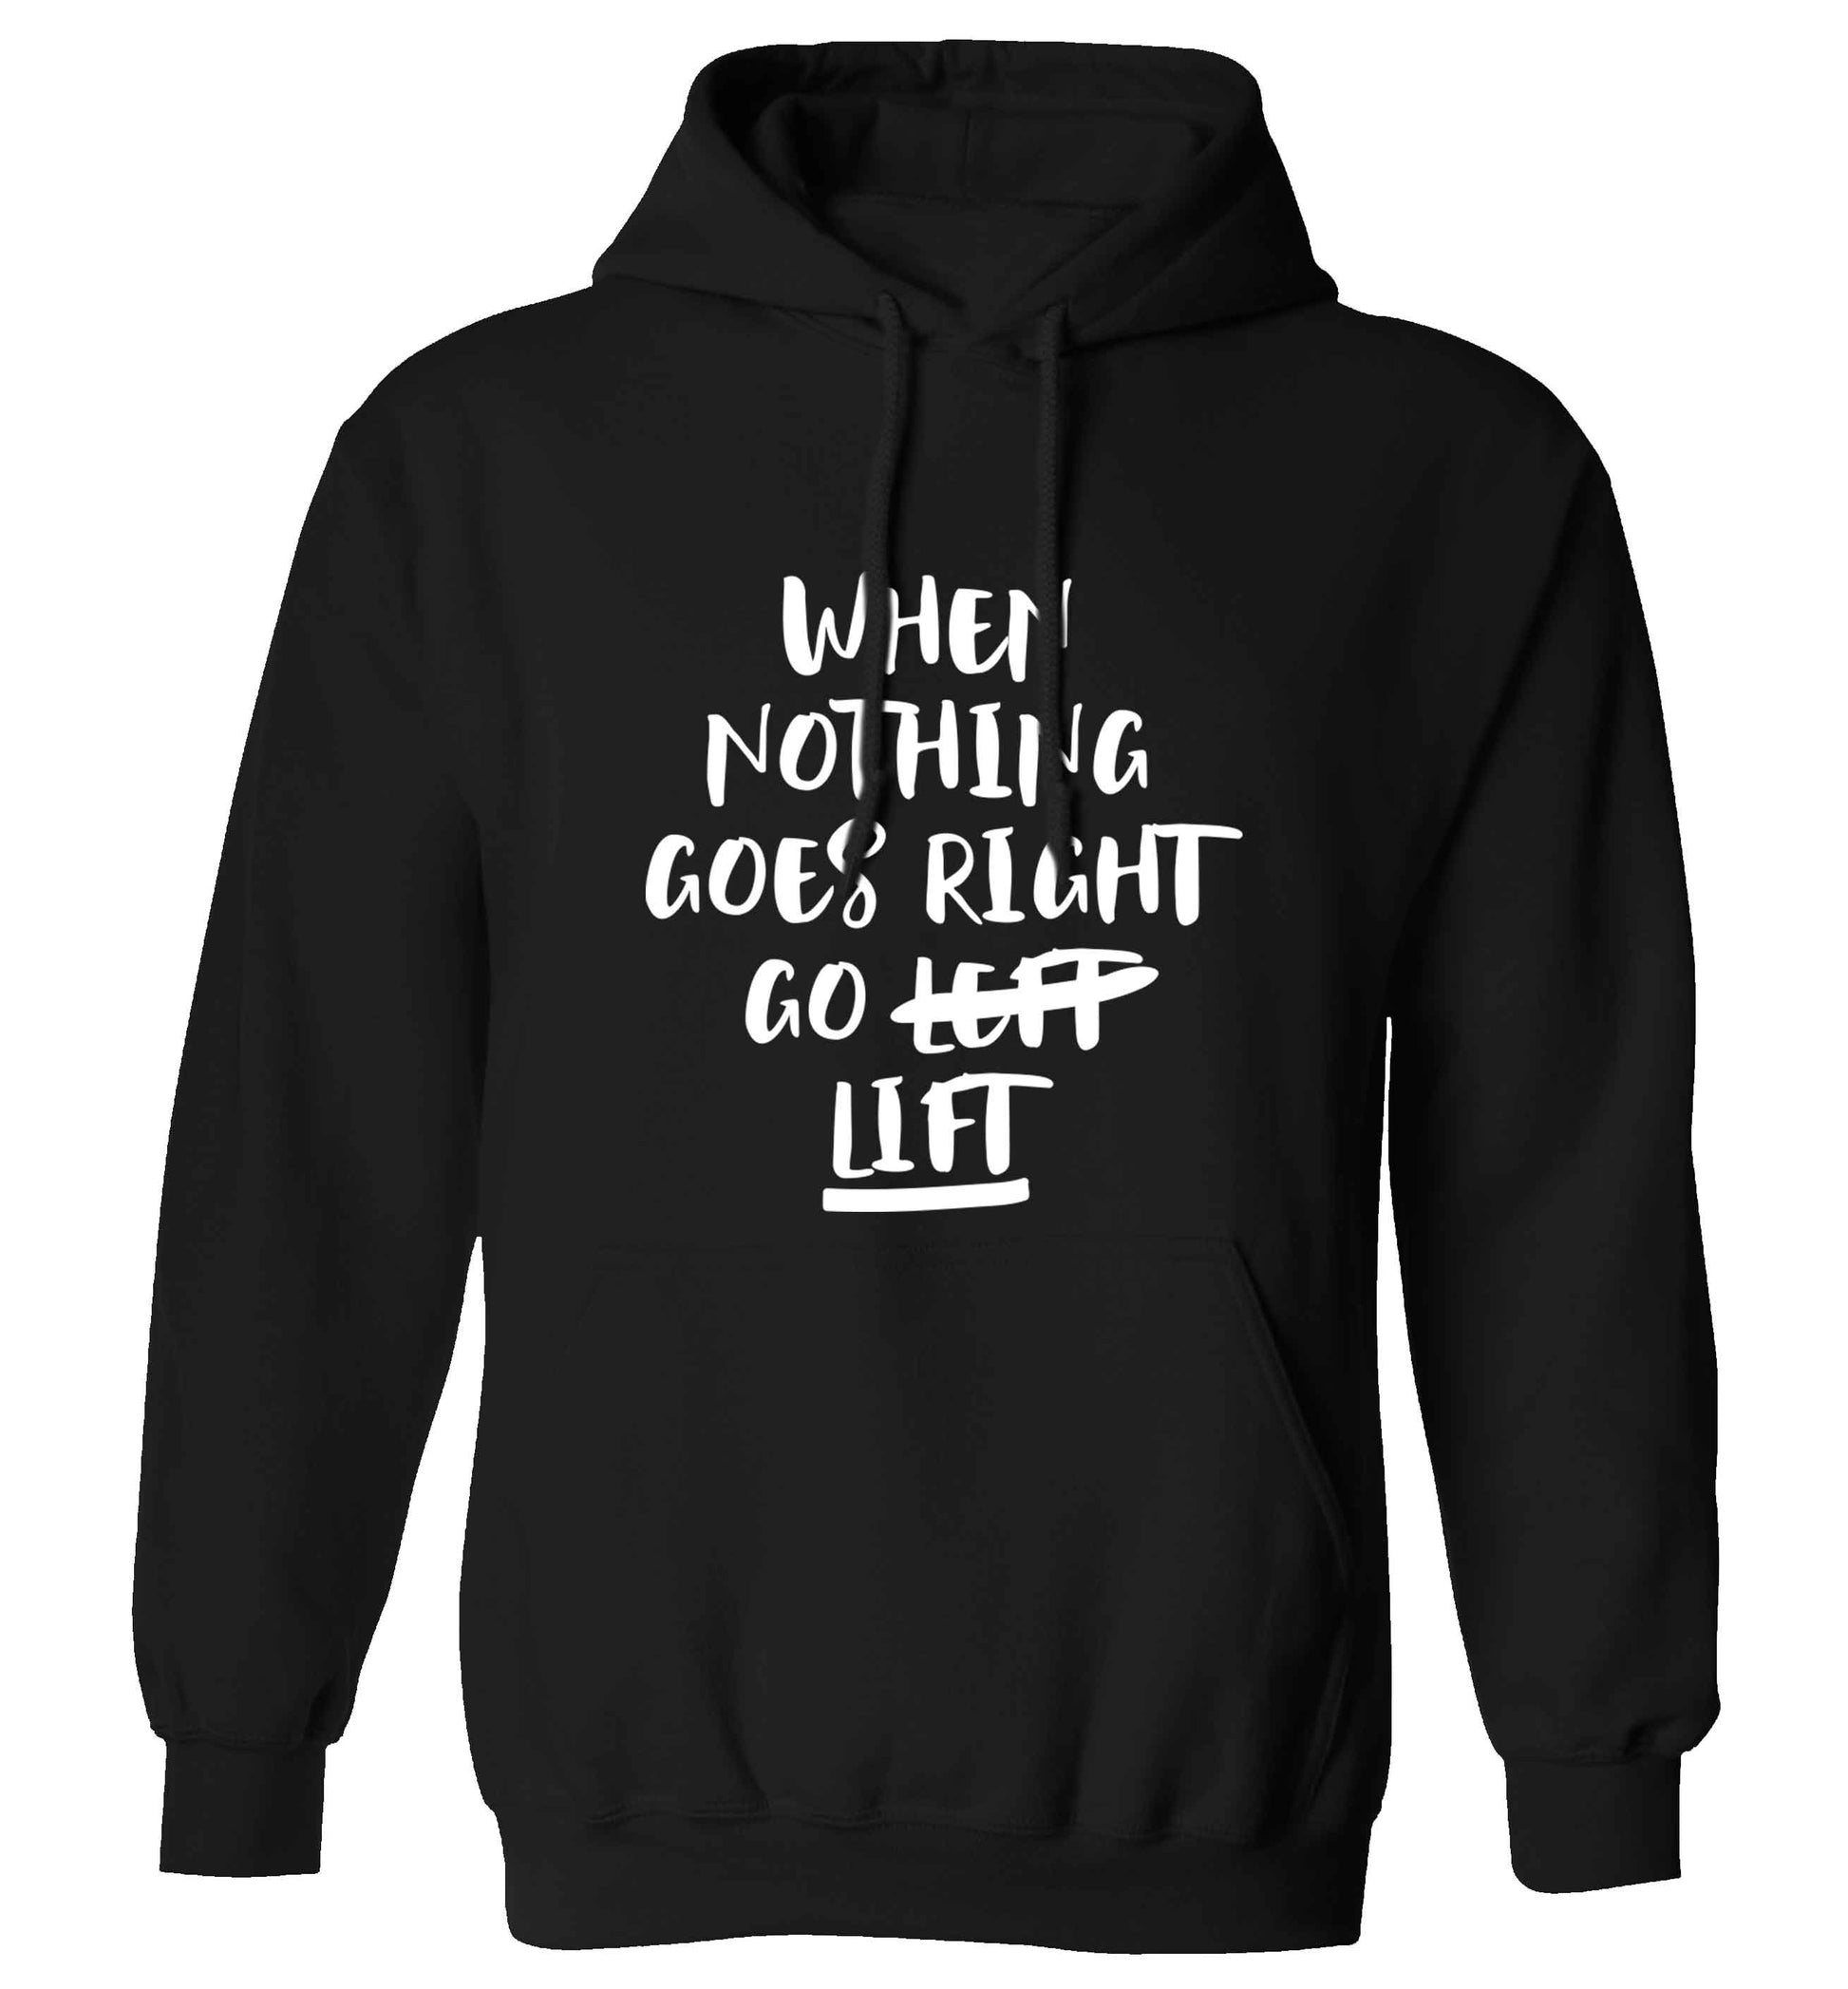 When nothing goes right go lift adults unisex black hoodie 2XL